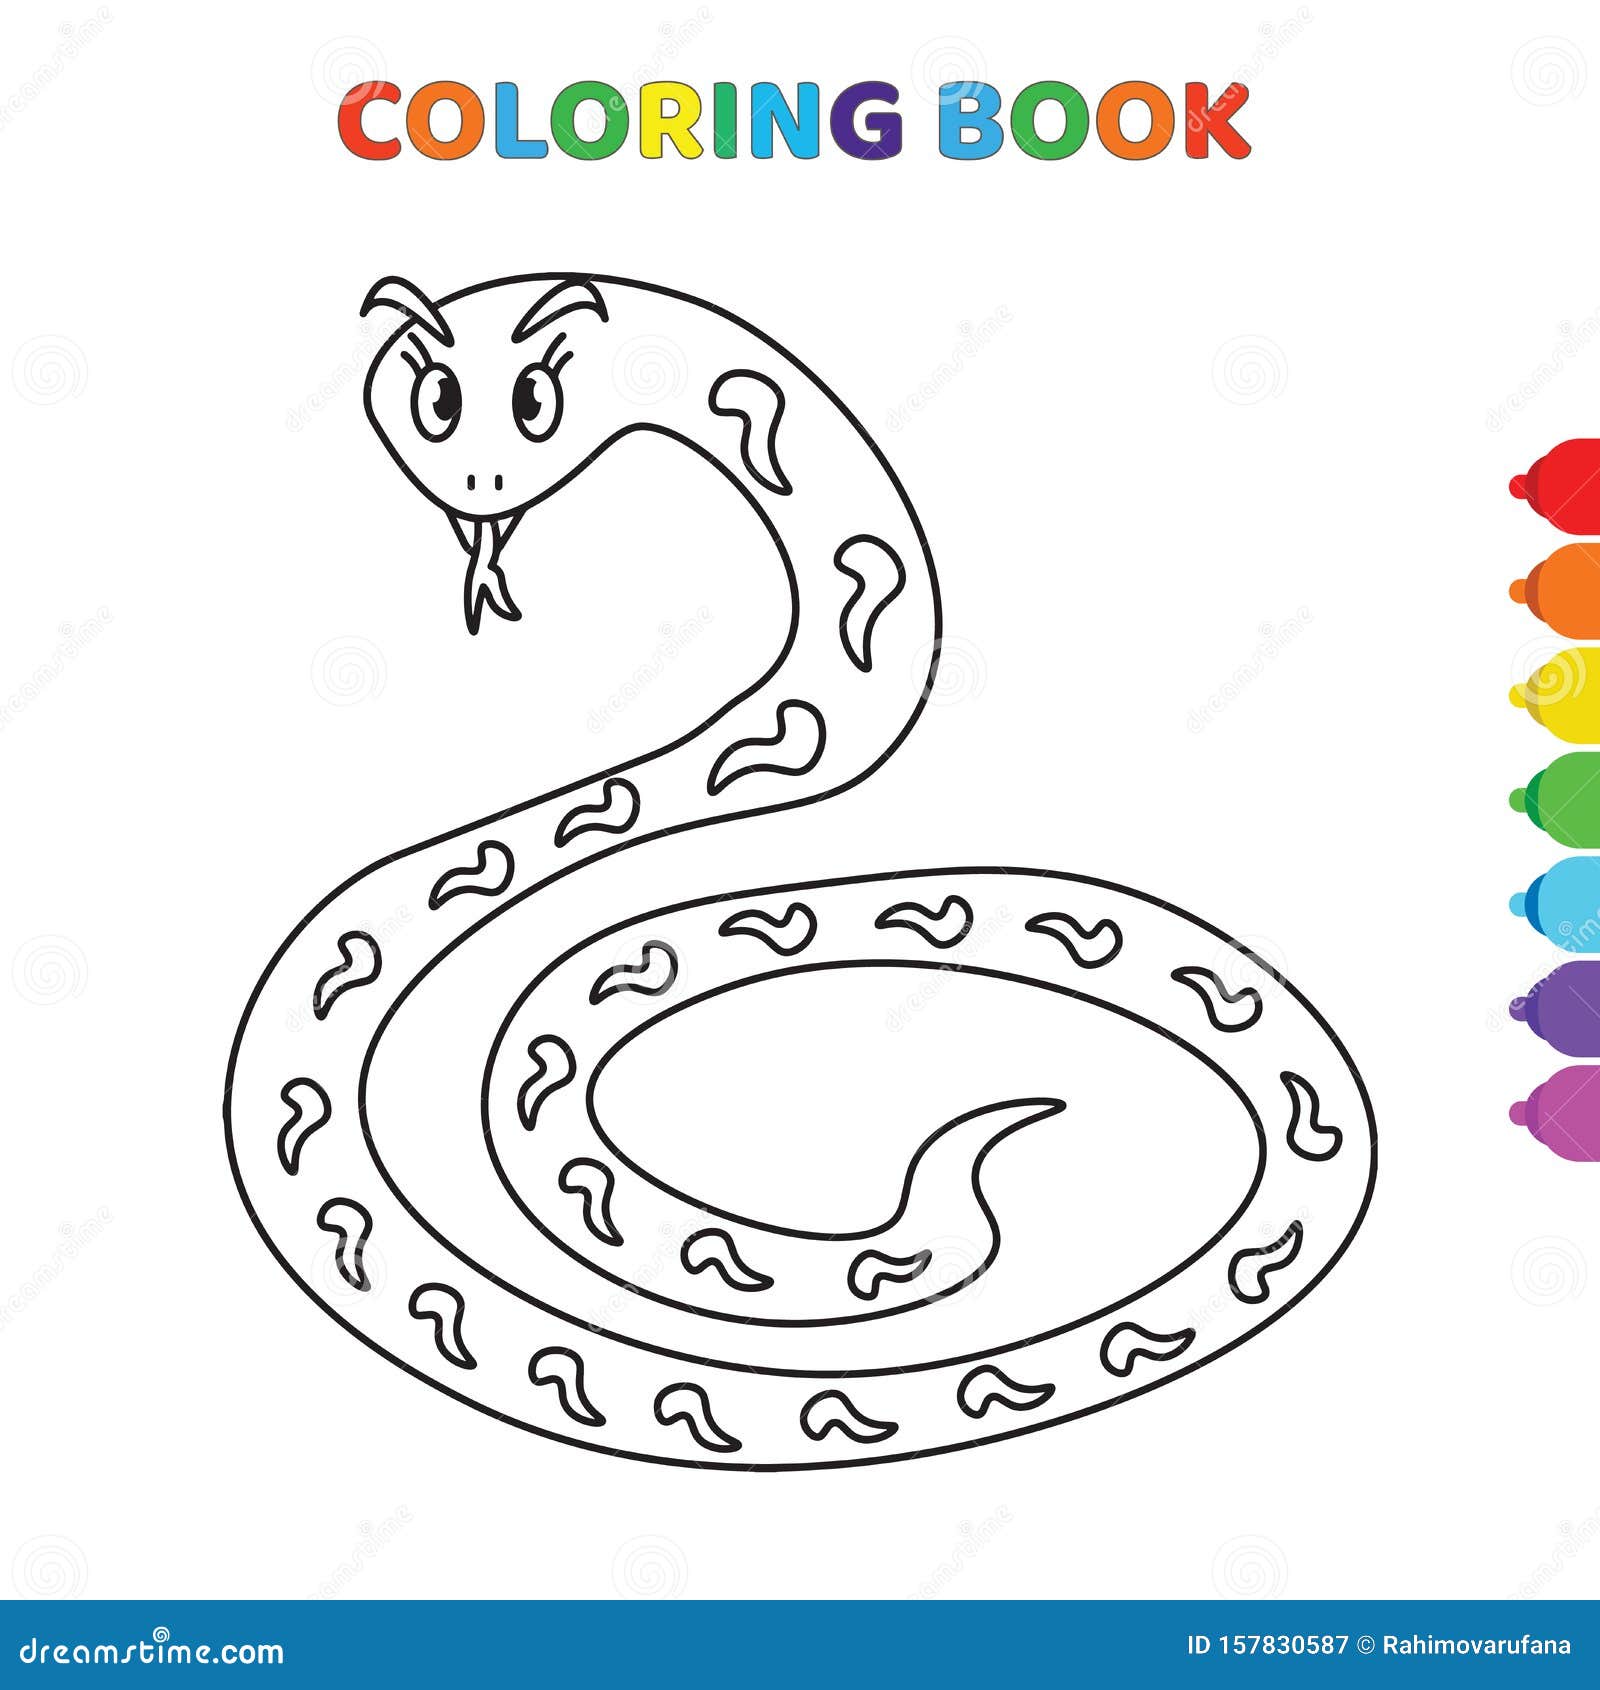 Cute Cartoon Snake Coloring Book for Kids. Black and White Vector  Illustration for Coloring Book Stock Vector - Illustration of drawn,  background: 157830587